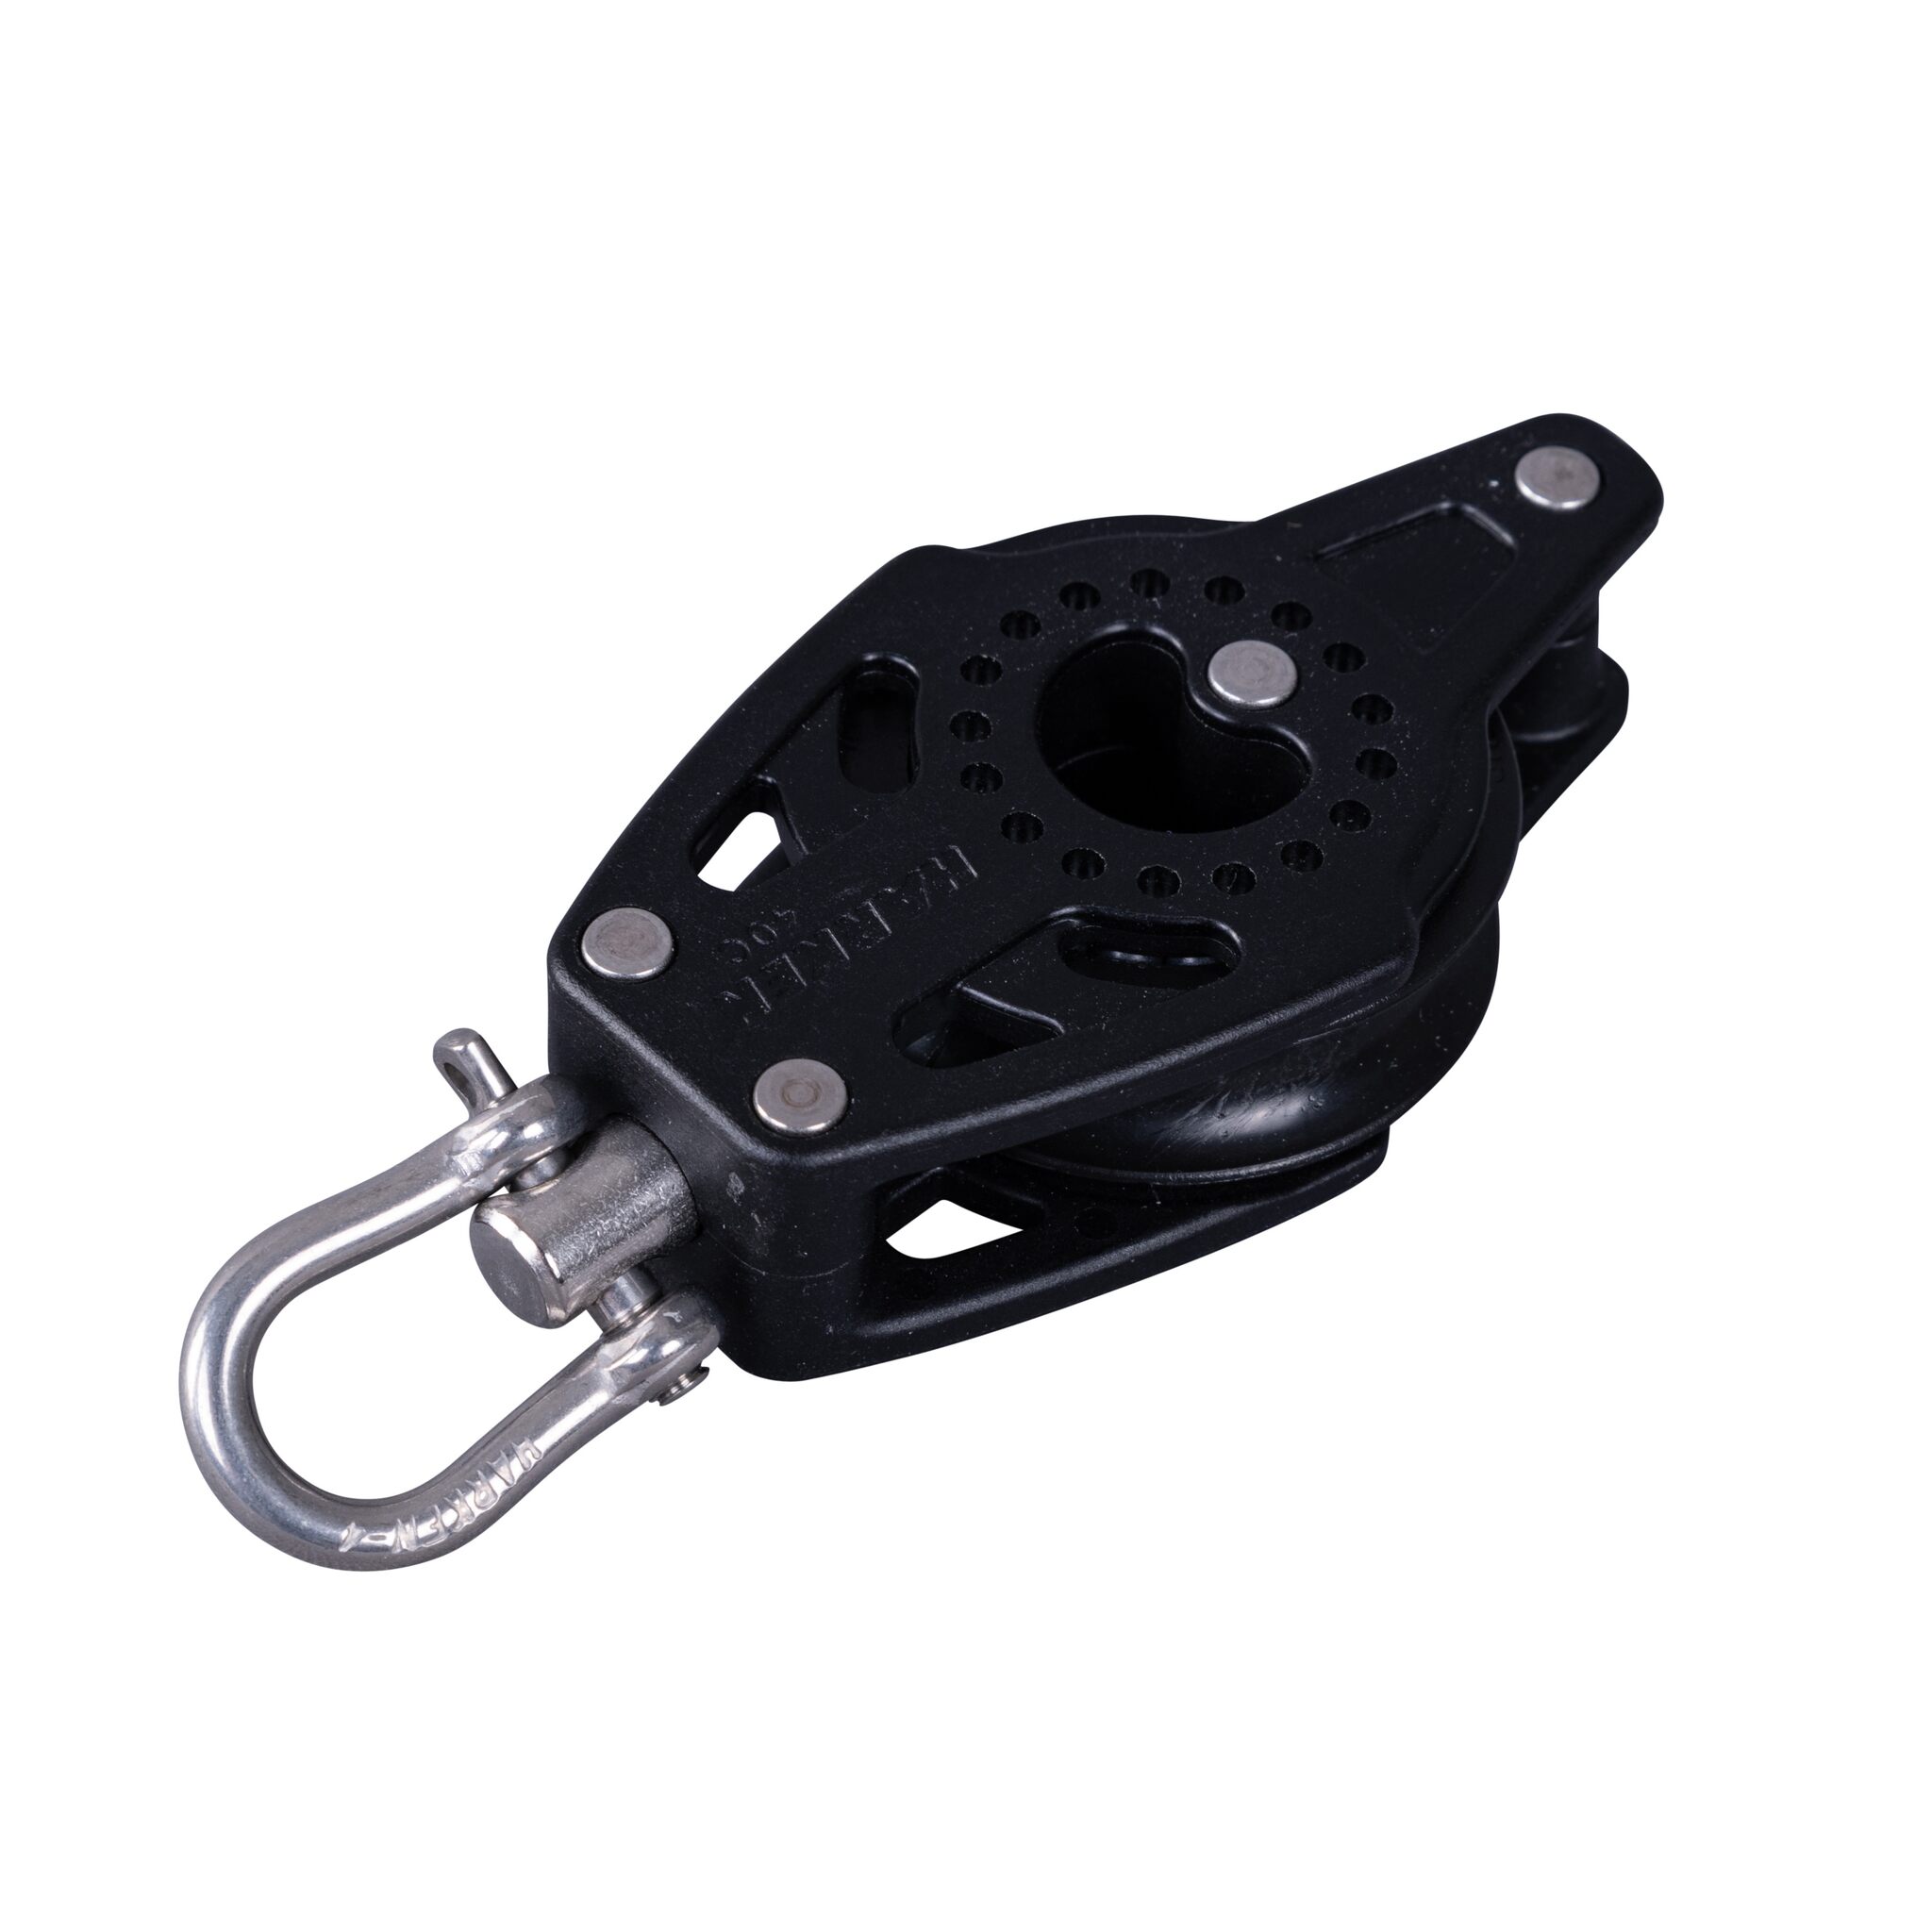 H2637 40 mm Carbo Block with swivel and dogfott